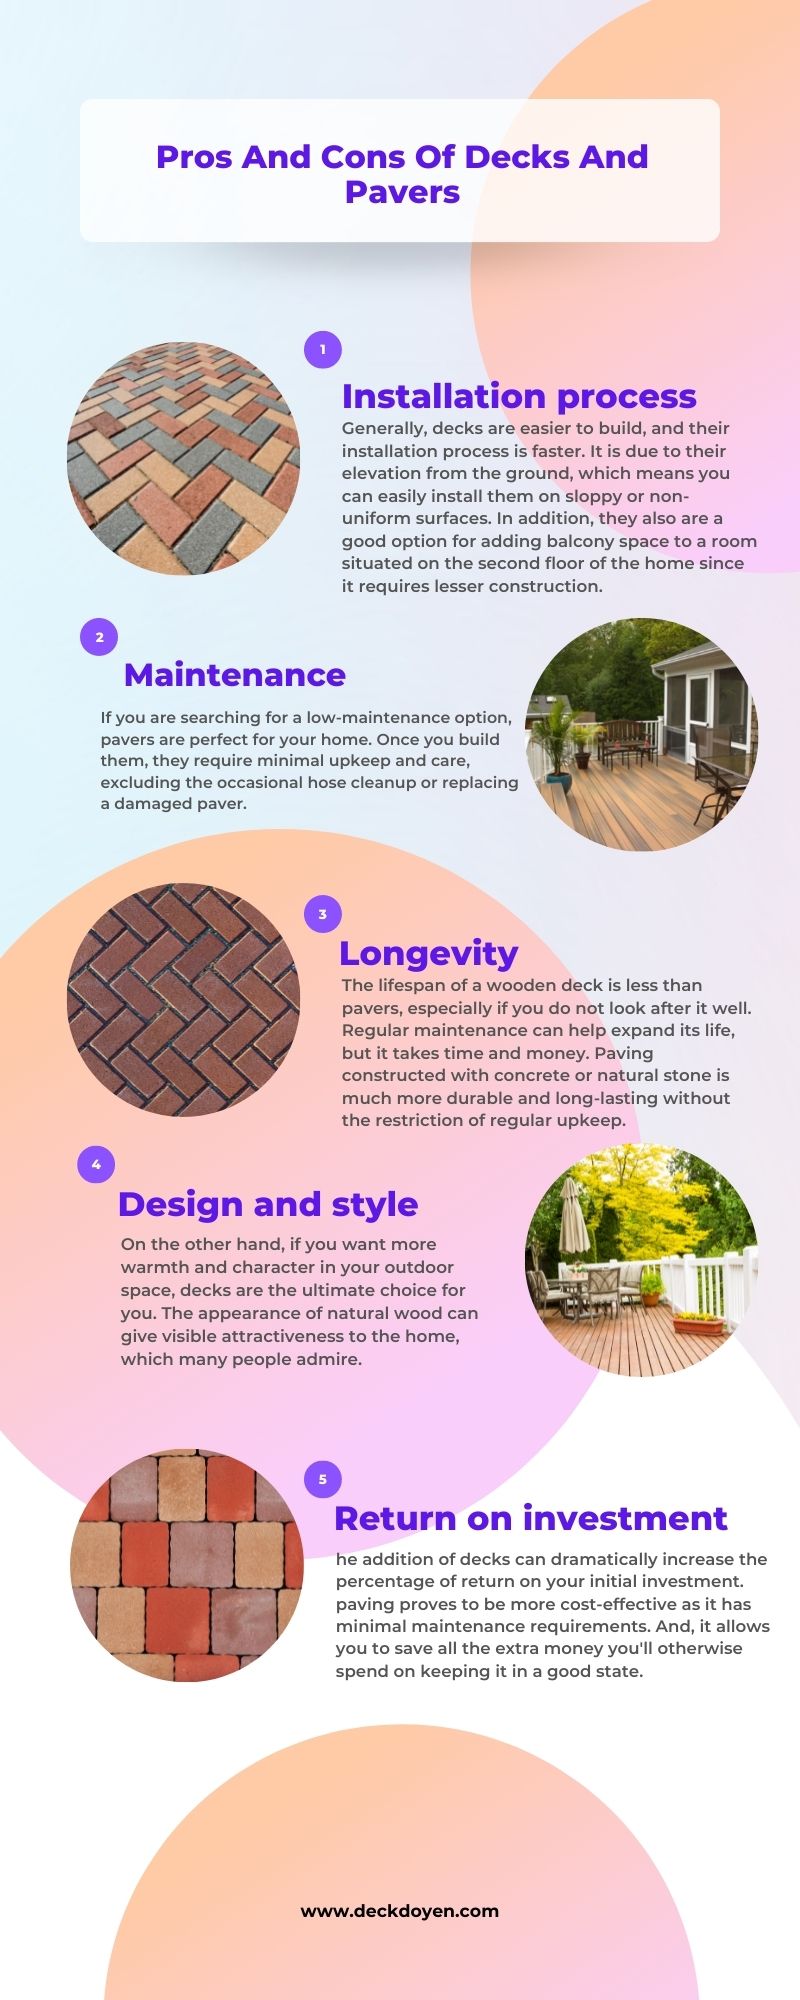 Pros And Cons Of Decks And Pavers